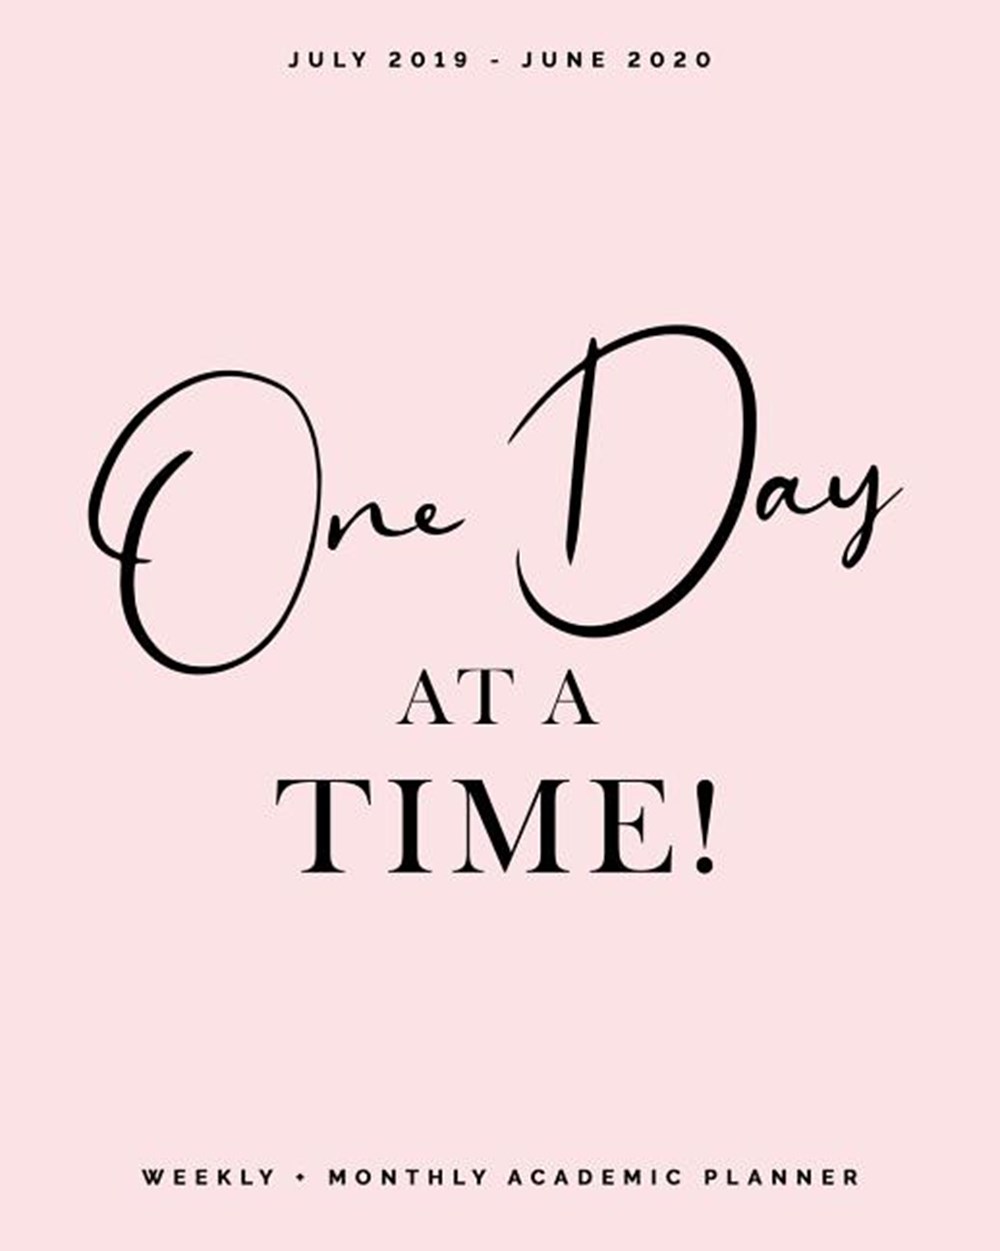 One Day at a Time - July 2019 - June 2020 - Weekly + Monthly Academic Planner Blush Pink Calendar Or